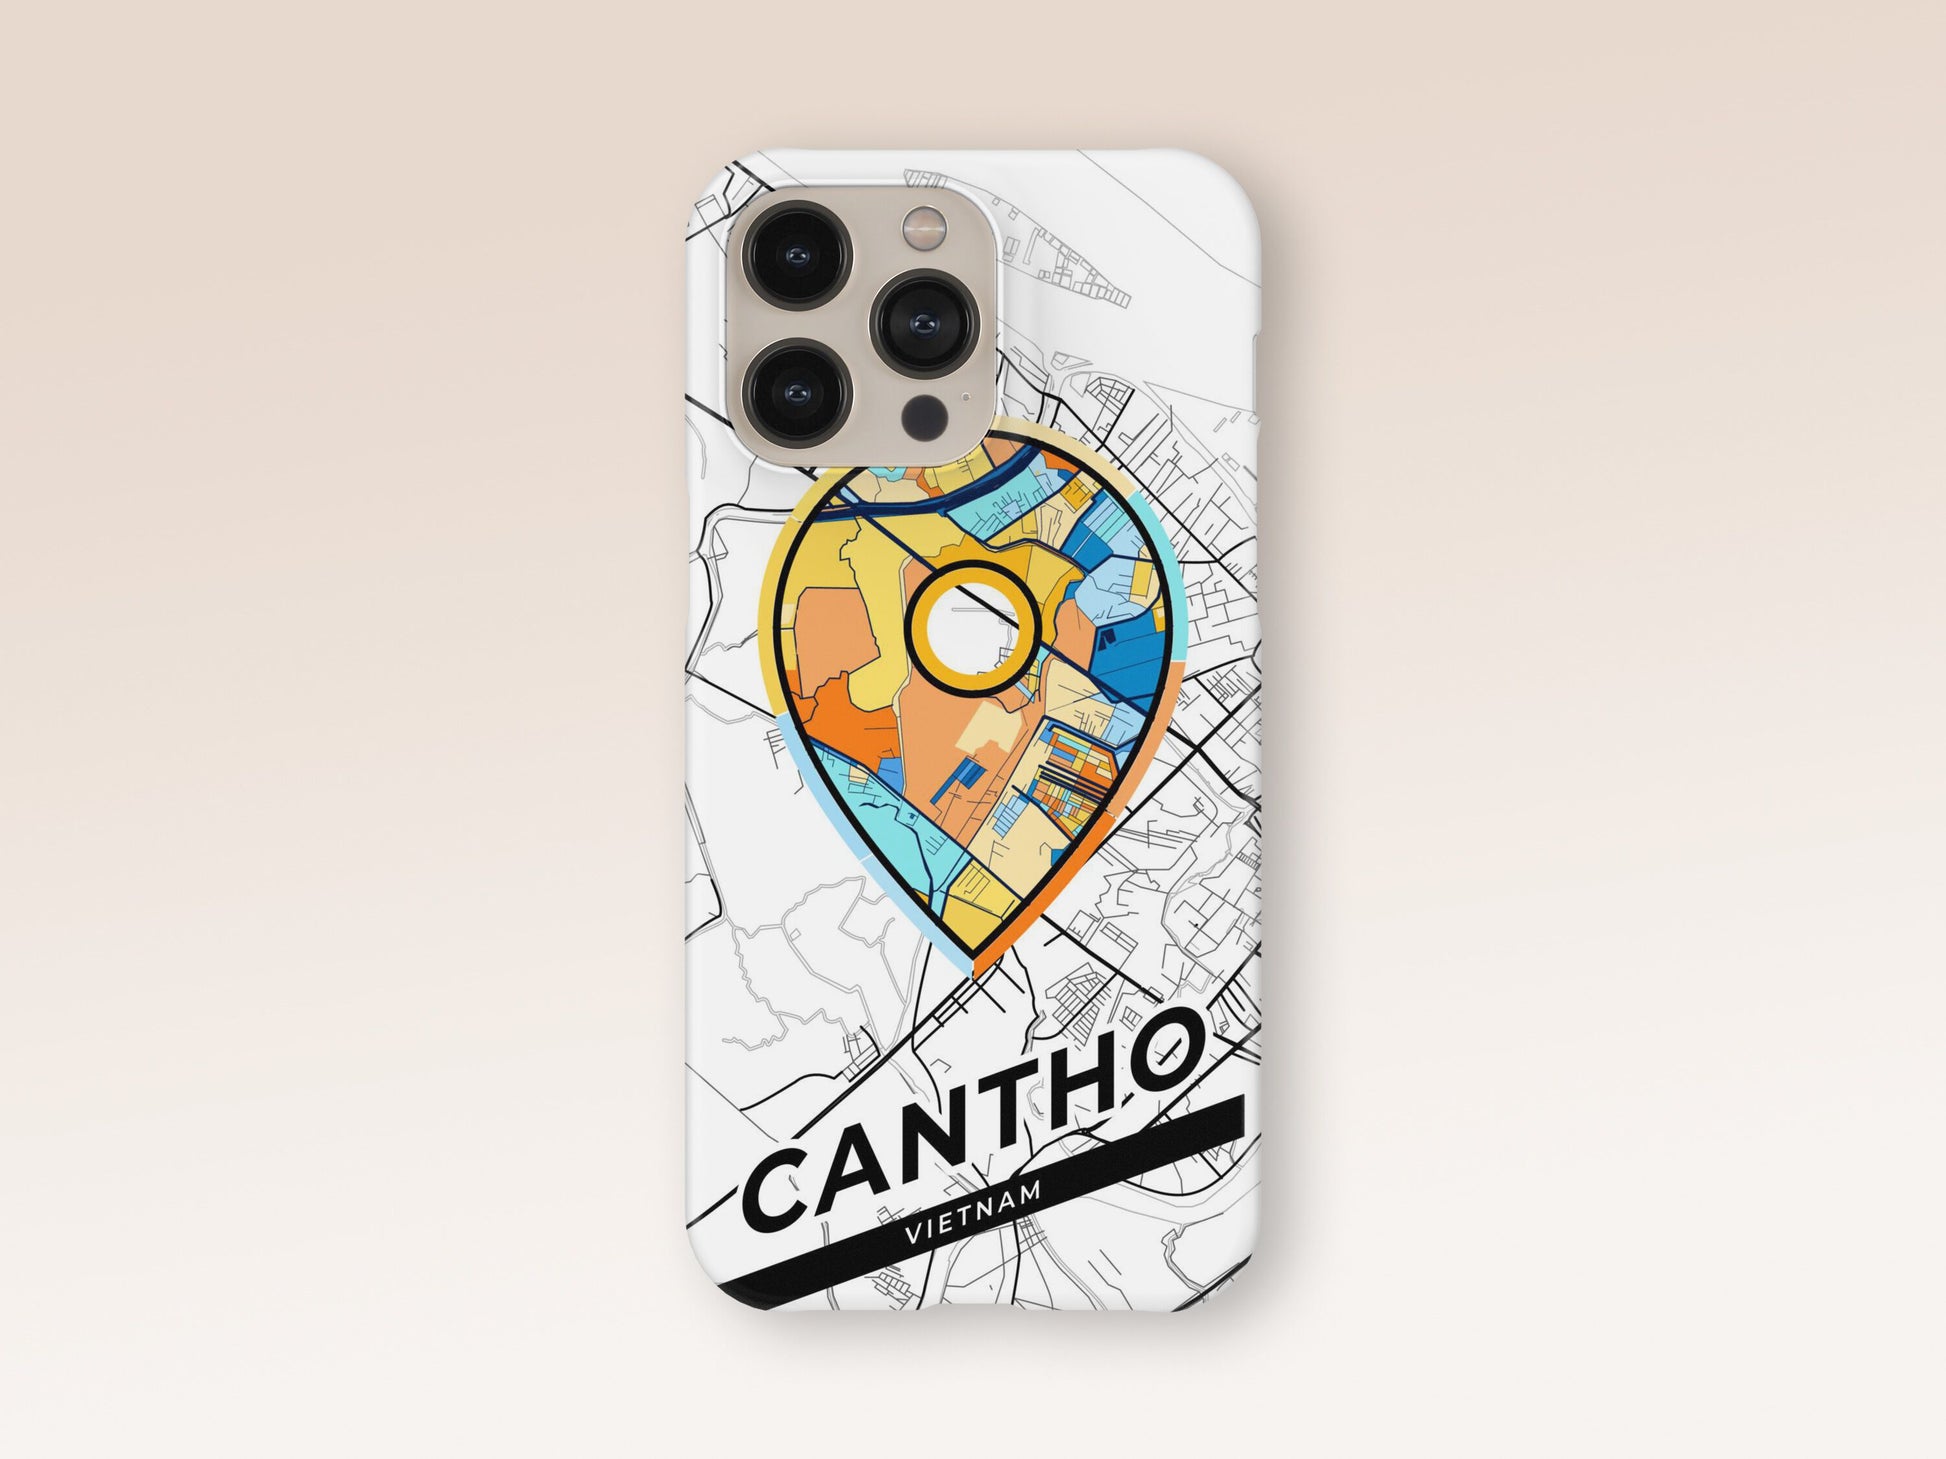 Cantho Vietnam slim phone case with colorful icon. Birthday, wedding or housewarming gift. Couple match cases. 1